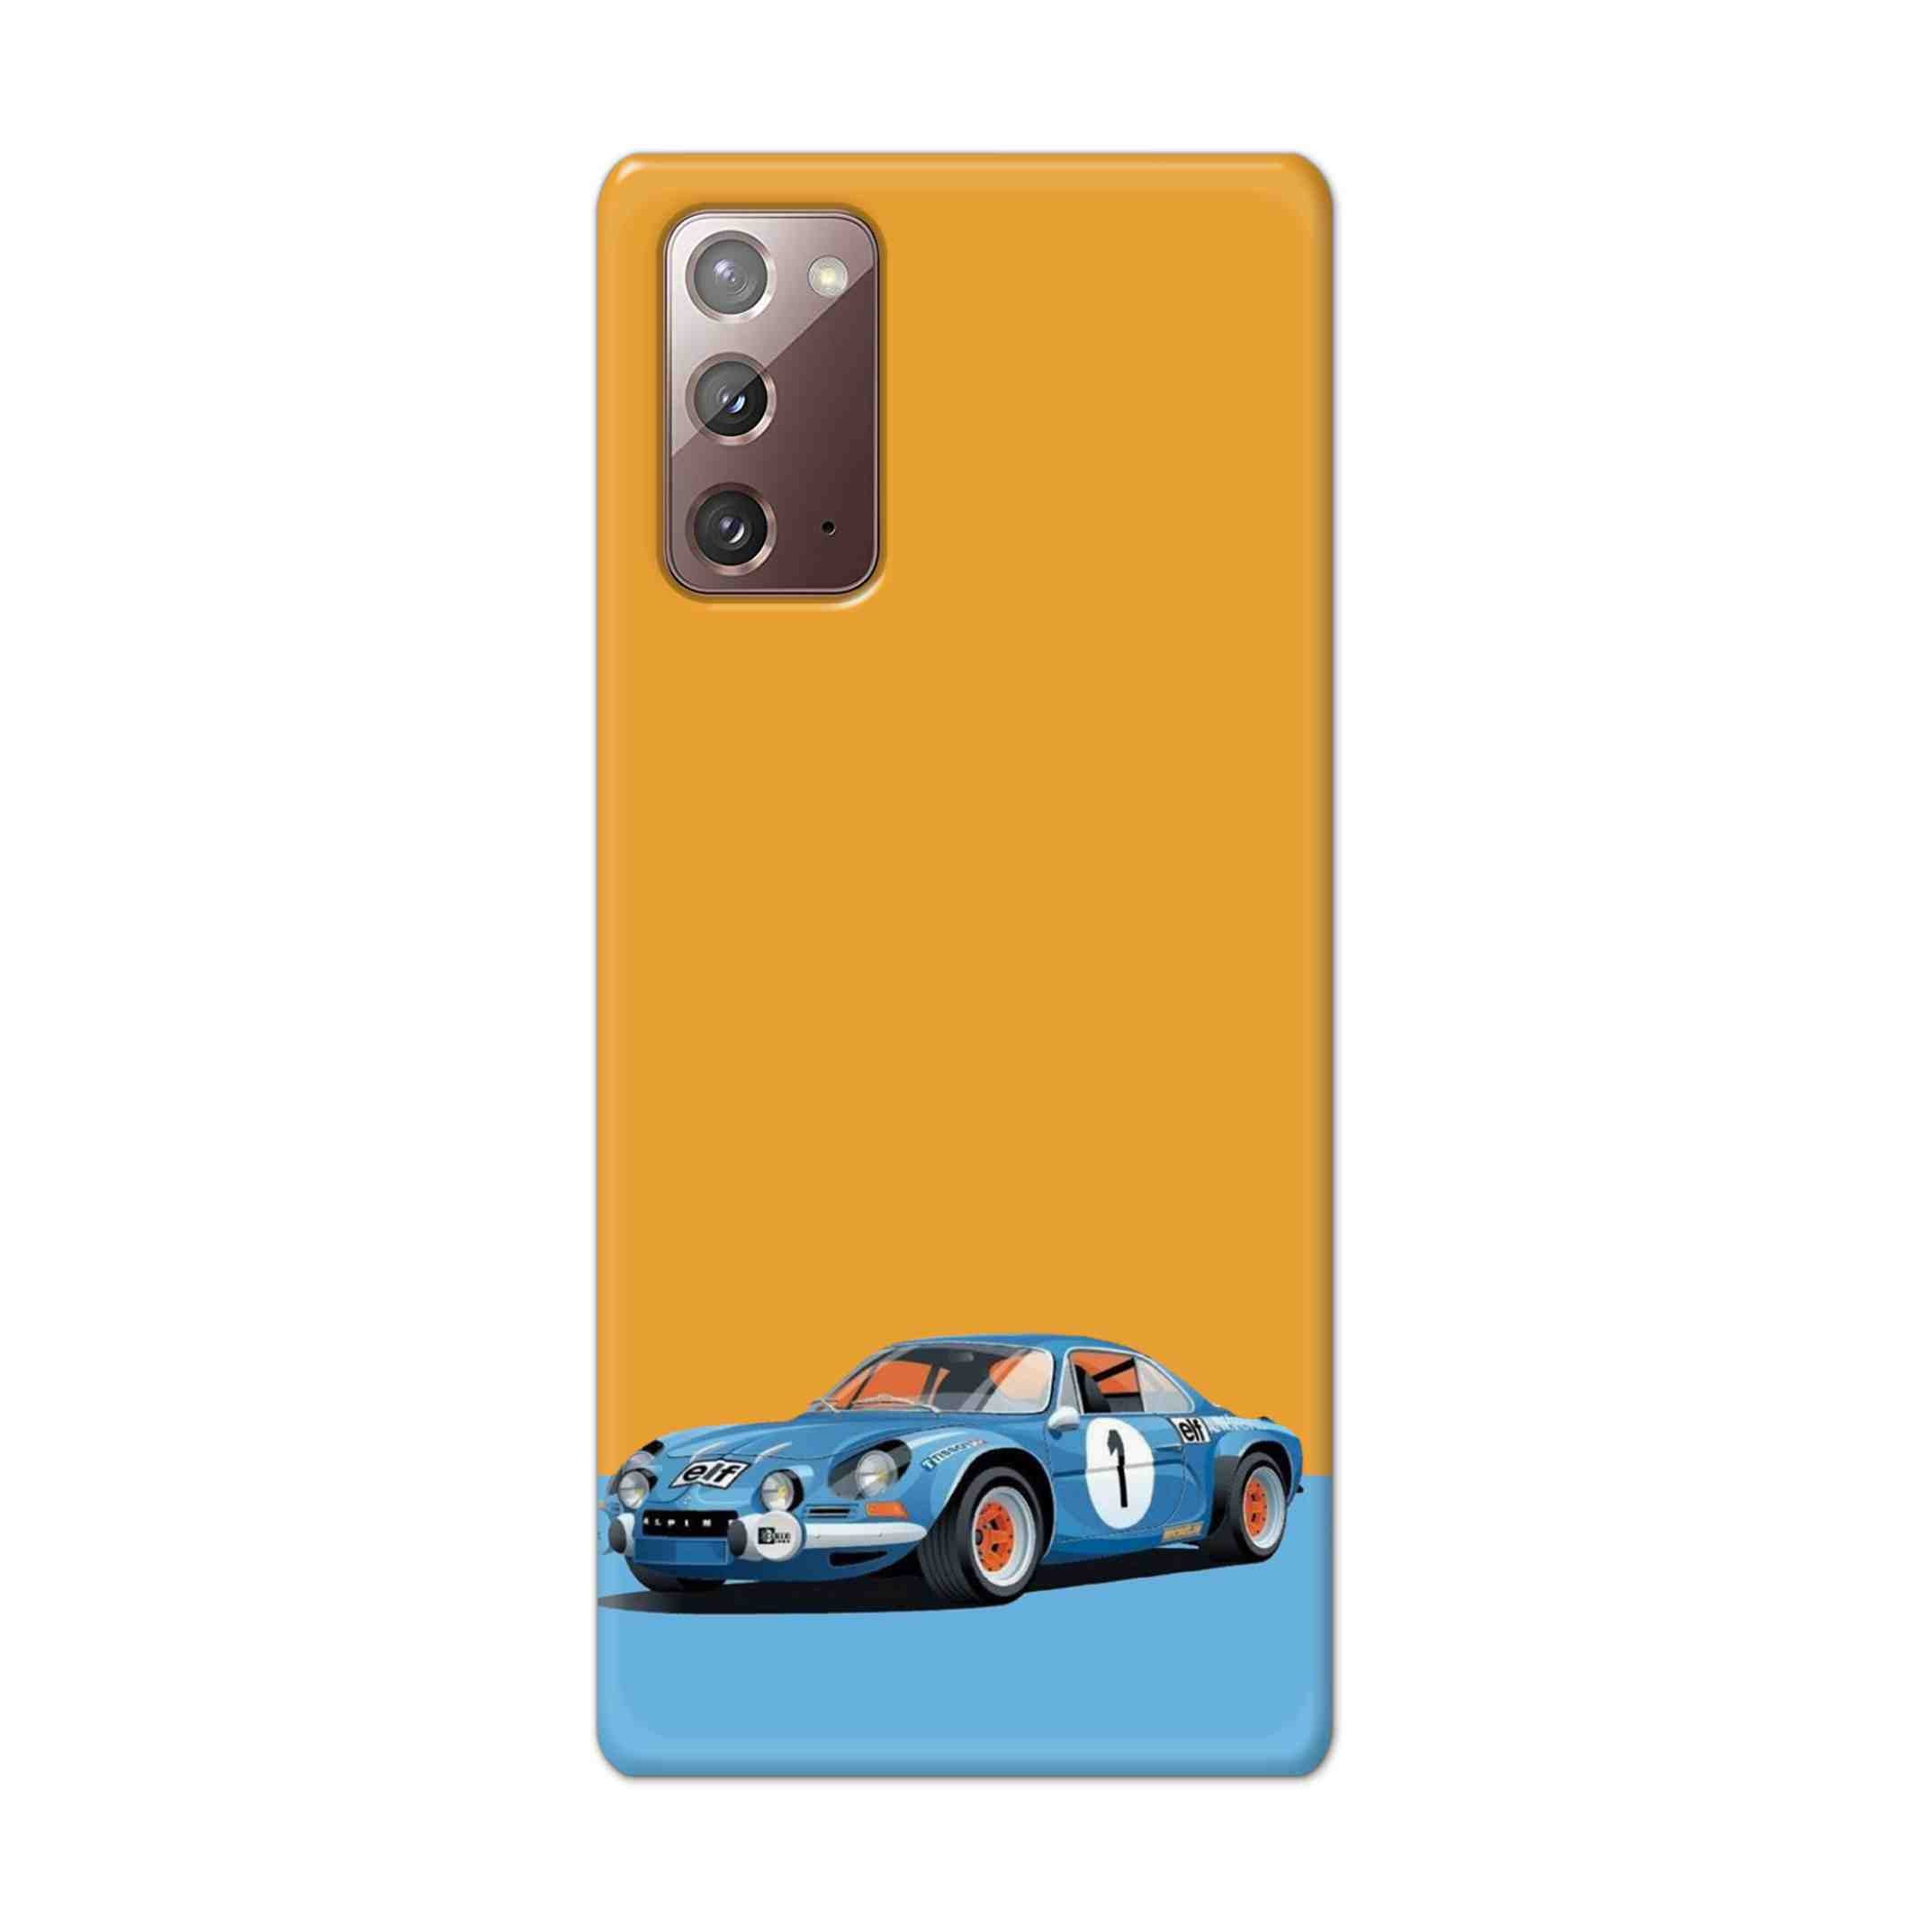 Buy Ferrari F1 Hard Back Mobile Phone Case Cover For Samsung Galaxy Note 20 Online